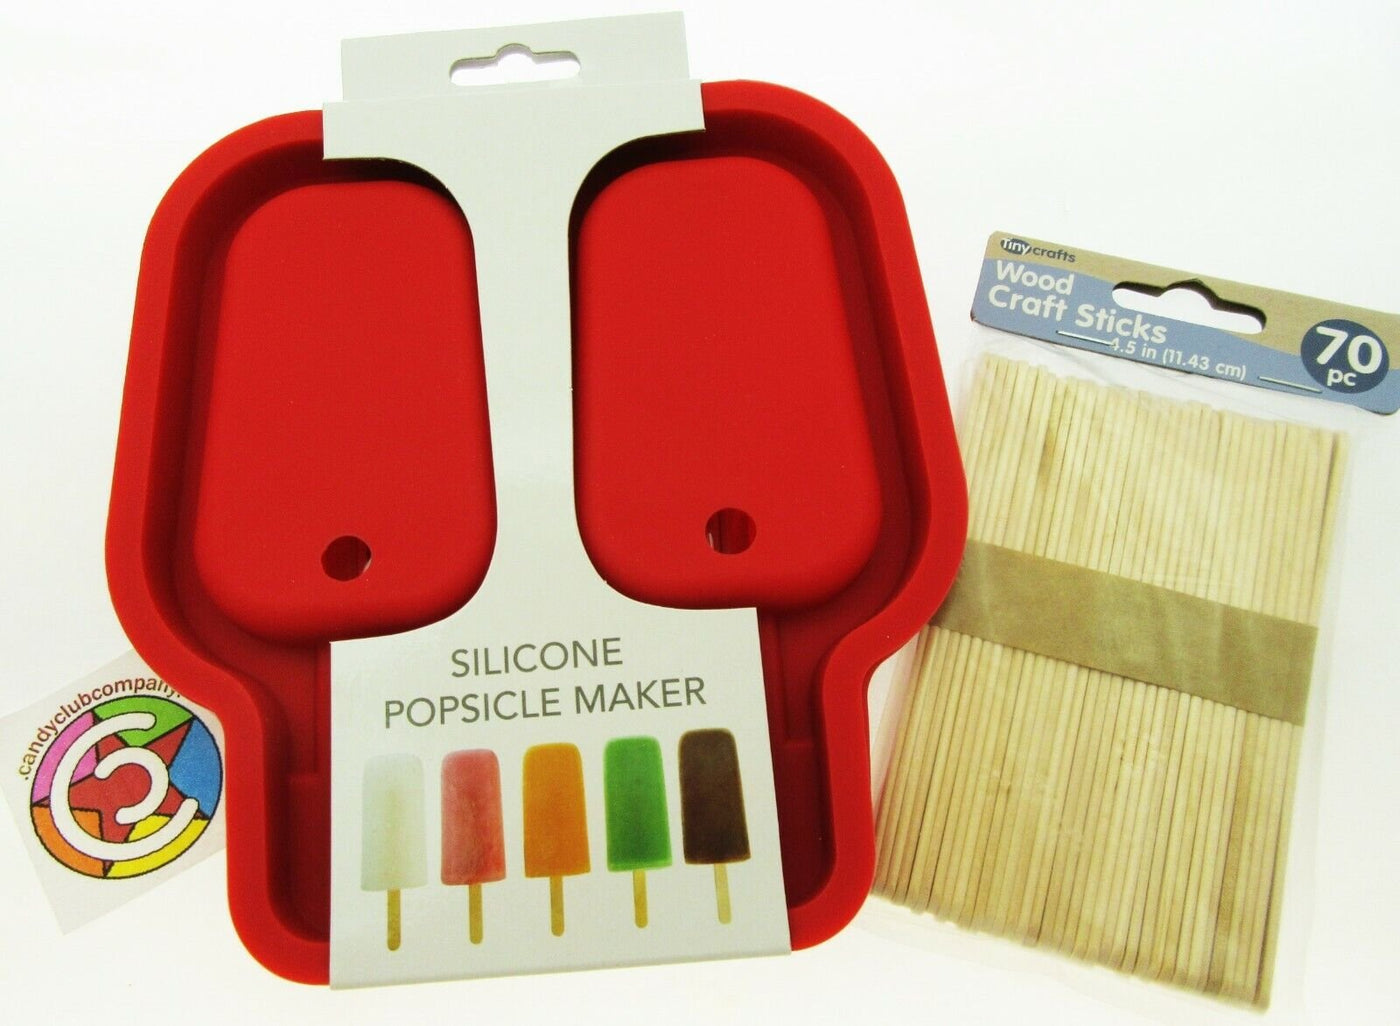 Silicone Popsicle Maker Tray ~ Sticks Included Flexible ~ By Kolorae - Red